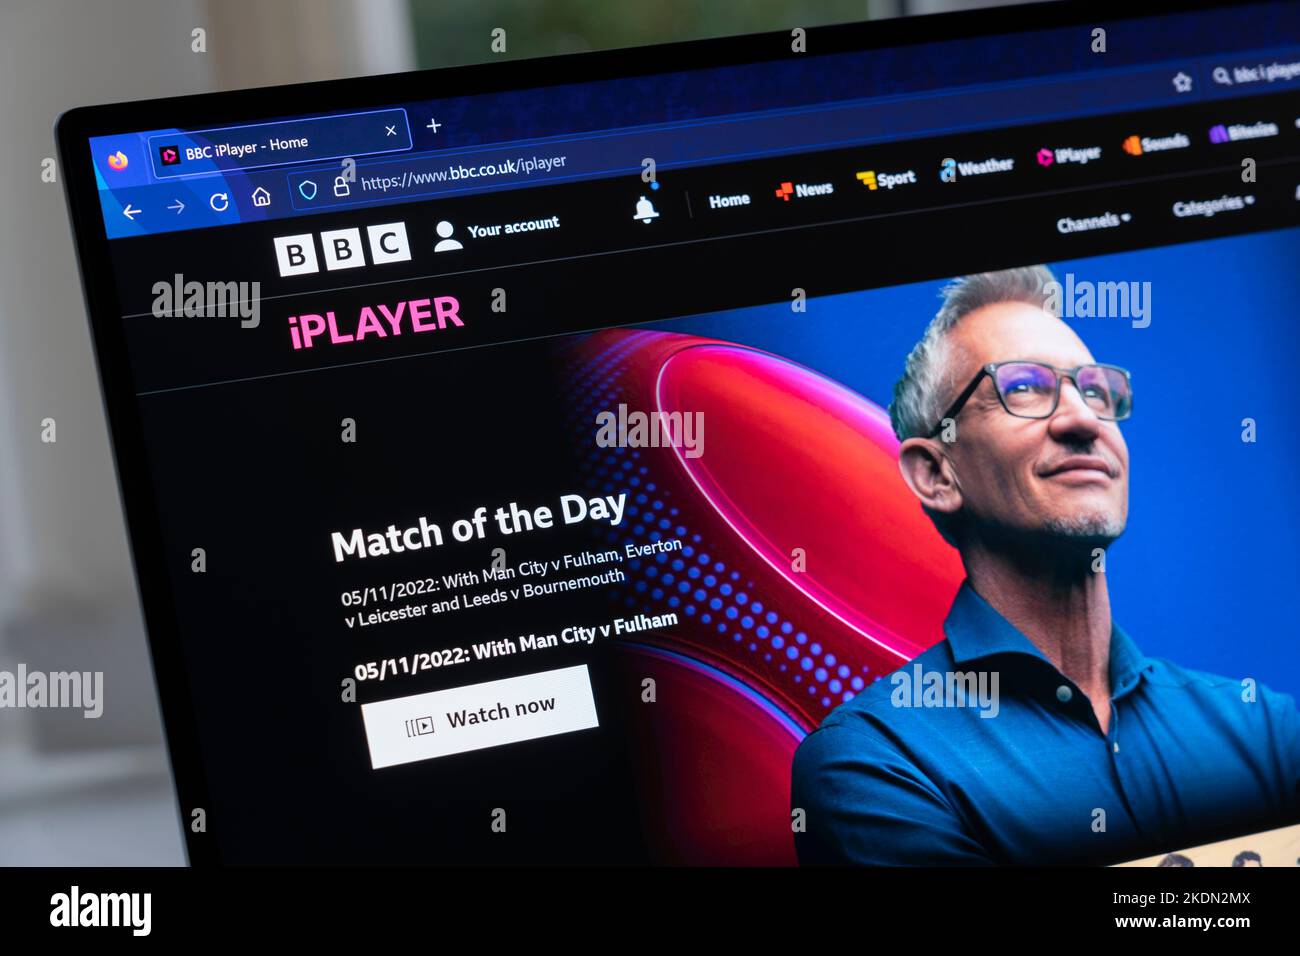 Match of the Day (MOTD) is a football highlights and analysis programme, here shown on BBC iPlayer on a laptop screen and hosted by Gary Lineker Stock Photo